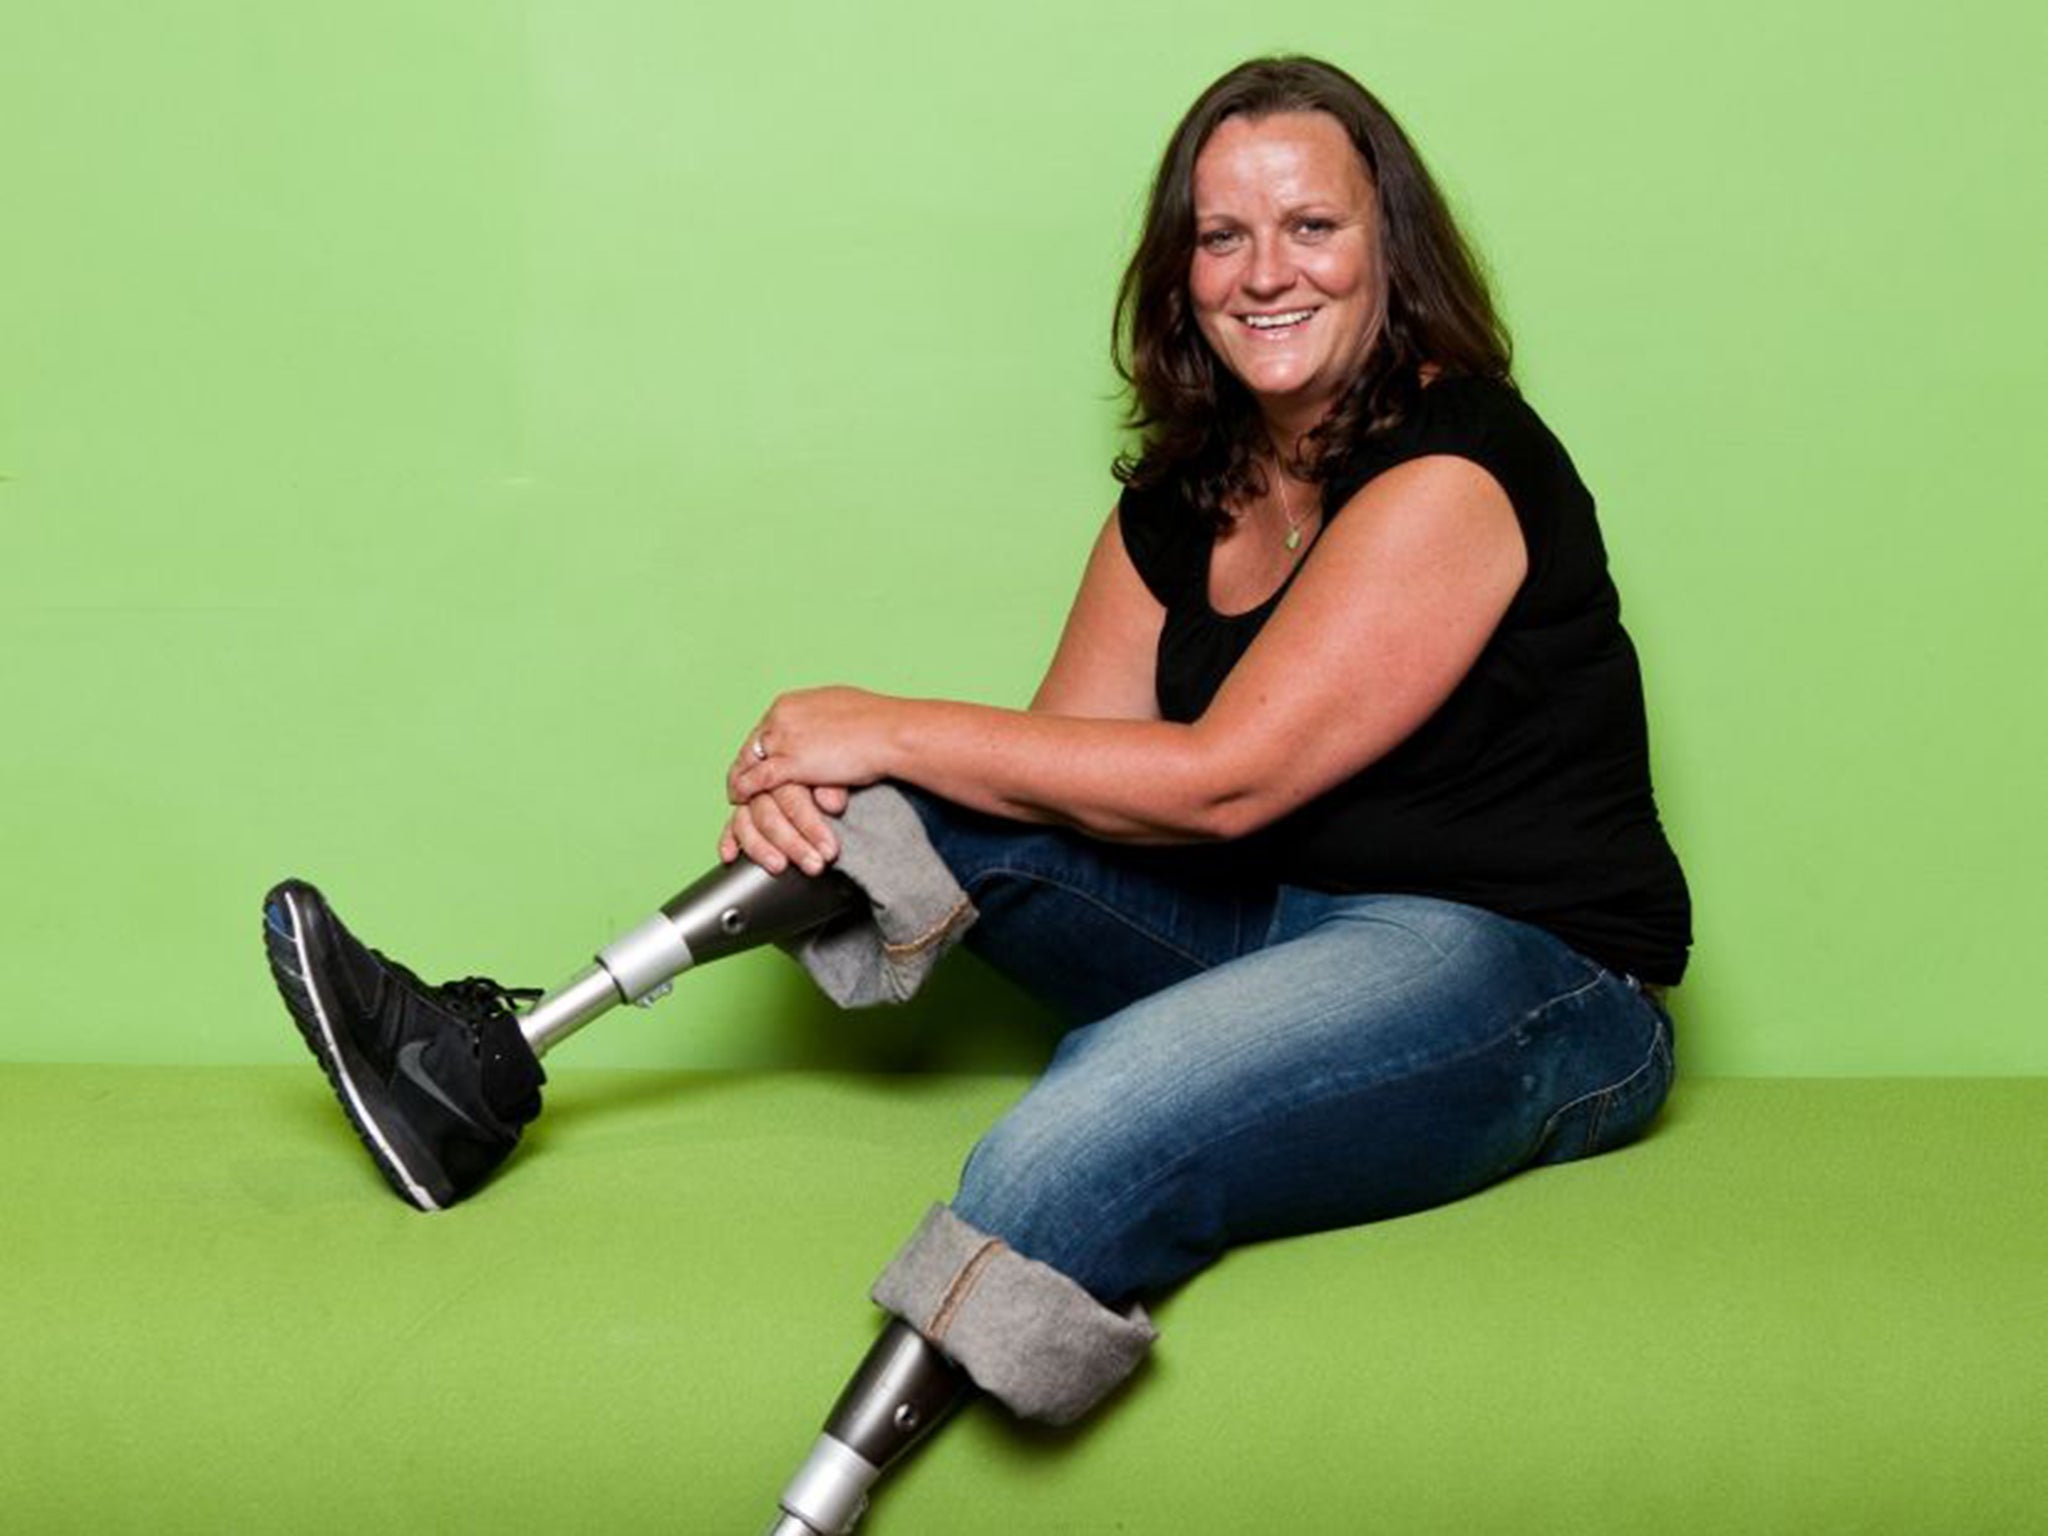 7/7 bombings 10 years on: Martine Wright lost both legs in the